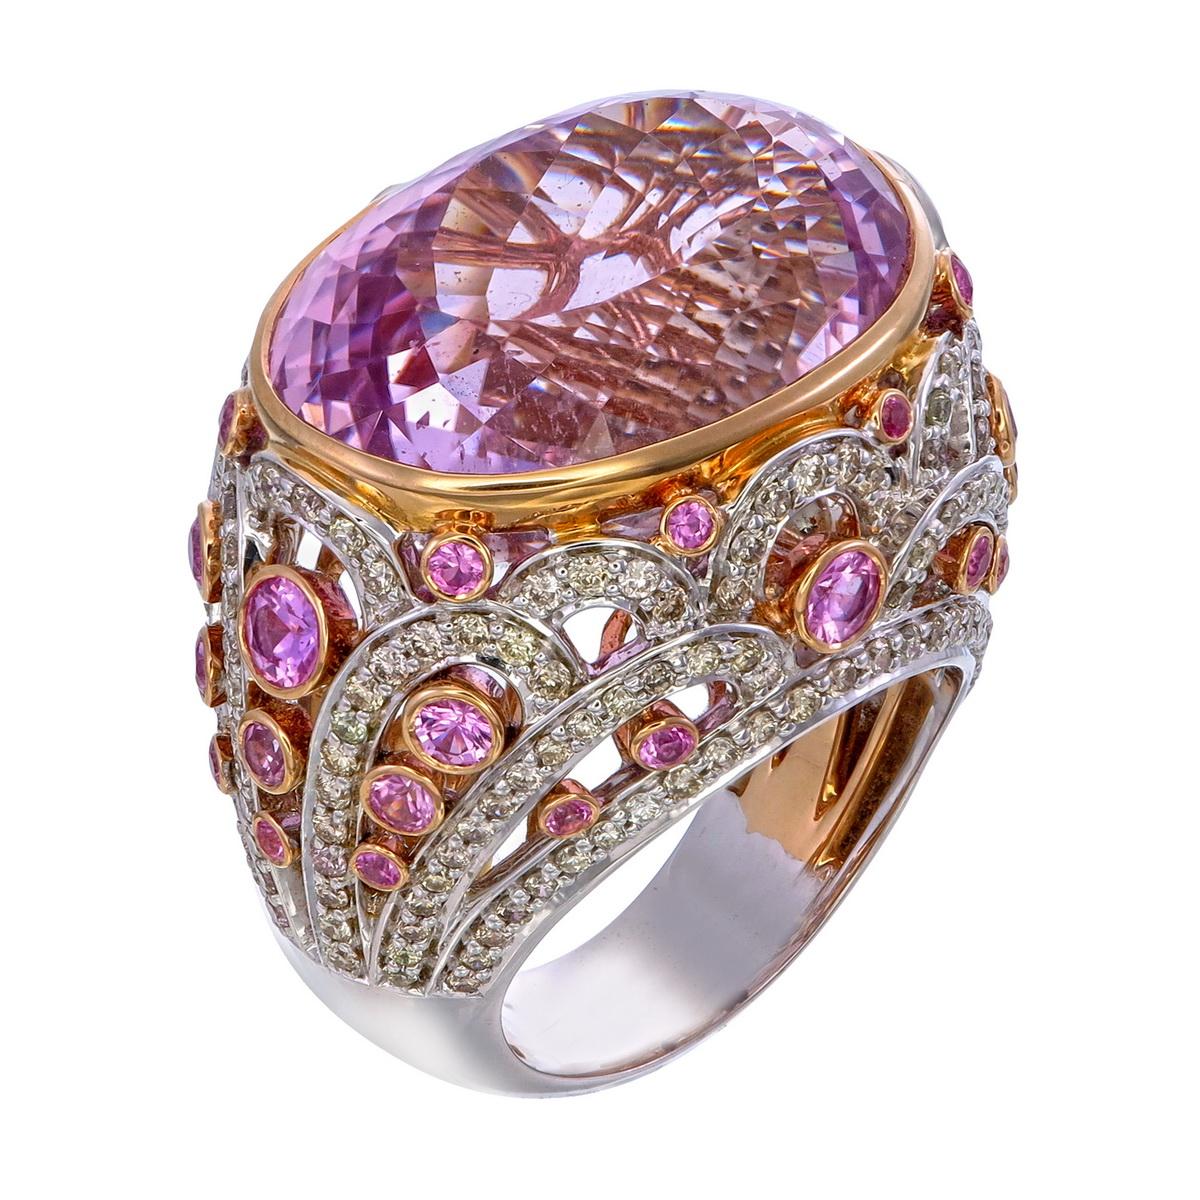 In the world of fine jewelry, there are creations that stand out not only for their sheer beauty but also for the stories they tell and the emotions they evoke. The 35.15-carat Oval Kunzite, 1.95-carat Pink Sapphire, and 1.83-carat White Diamond